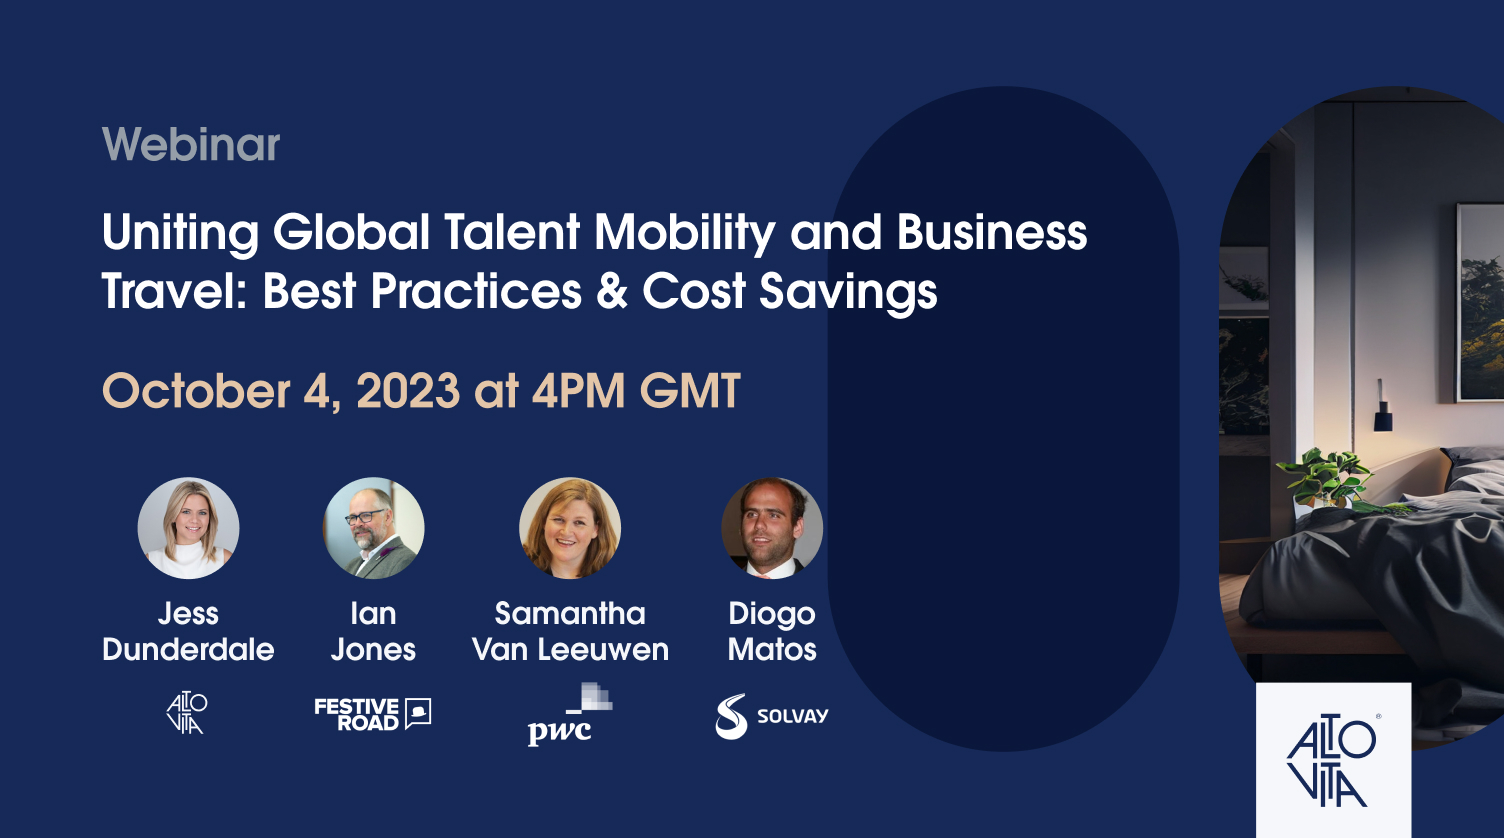 Webinar: Uniting Global Talent Mobility and Business Travel: Best Practices & Cost Savings